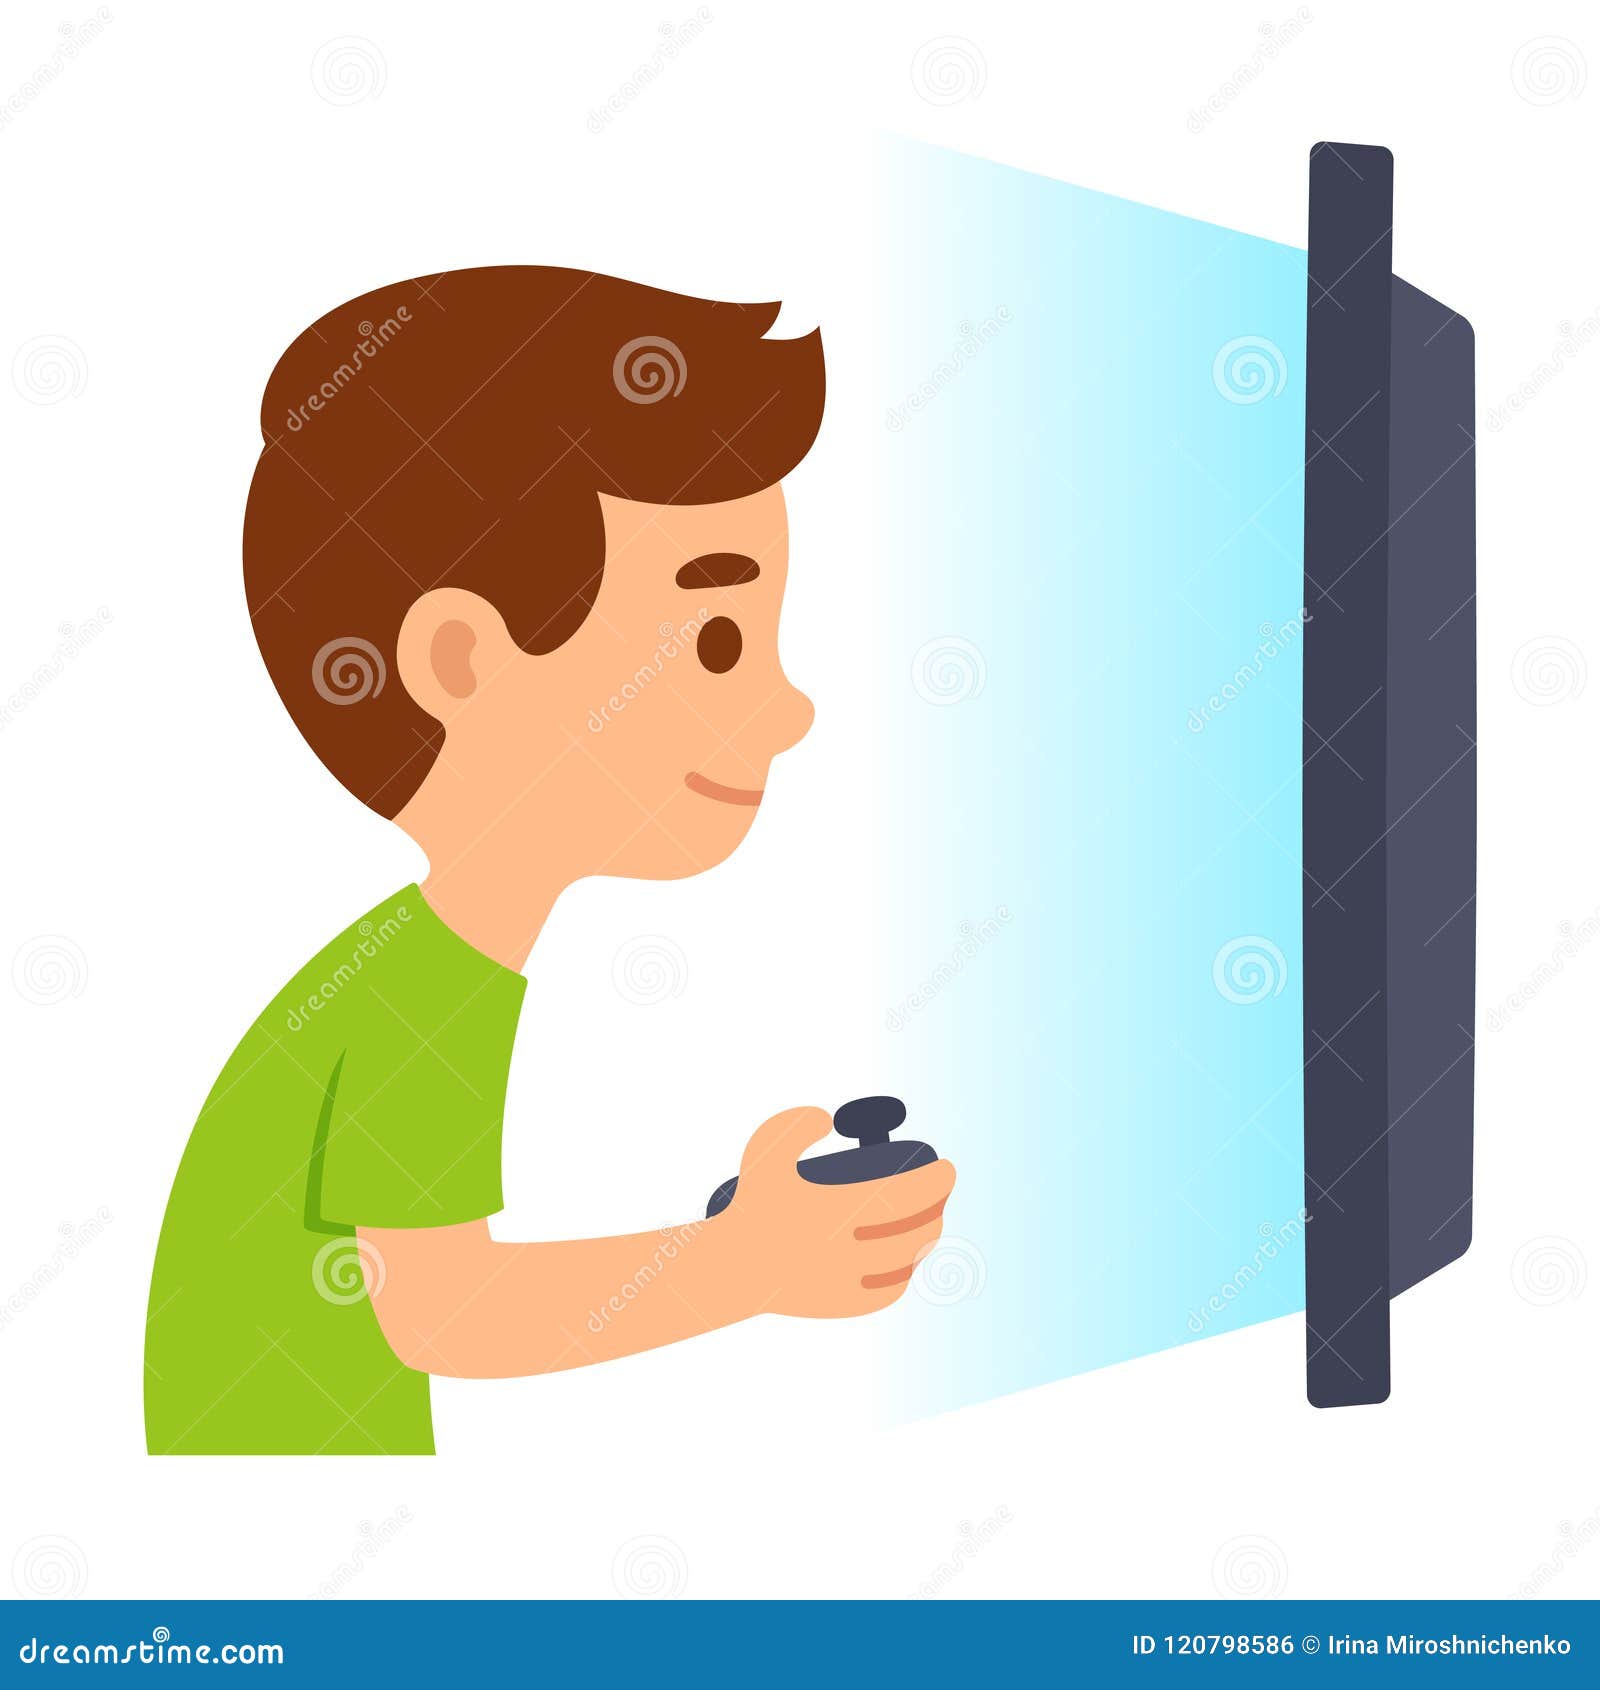 Boy playing video games stock vector. Illustration of online - 120798586